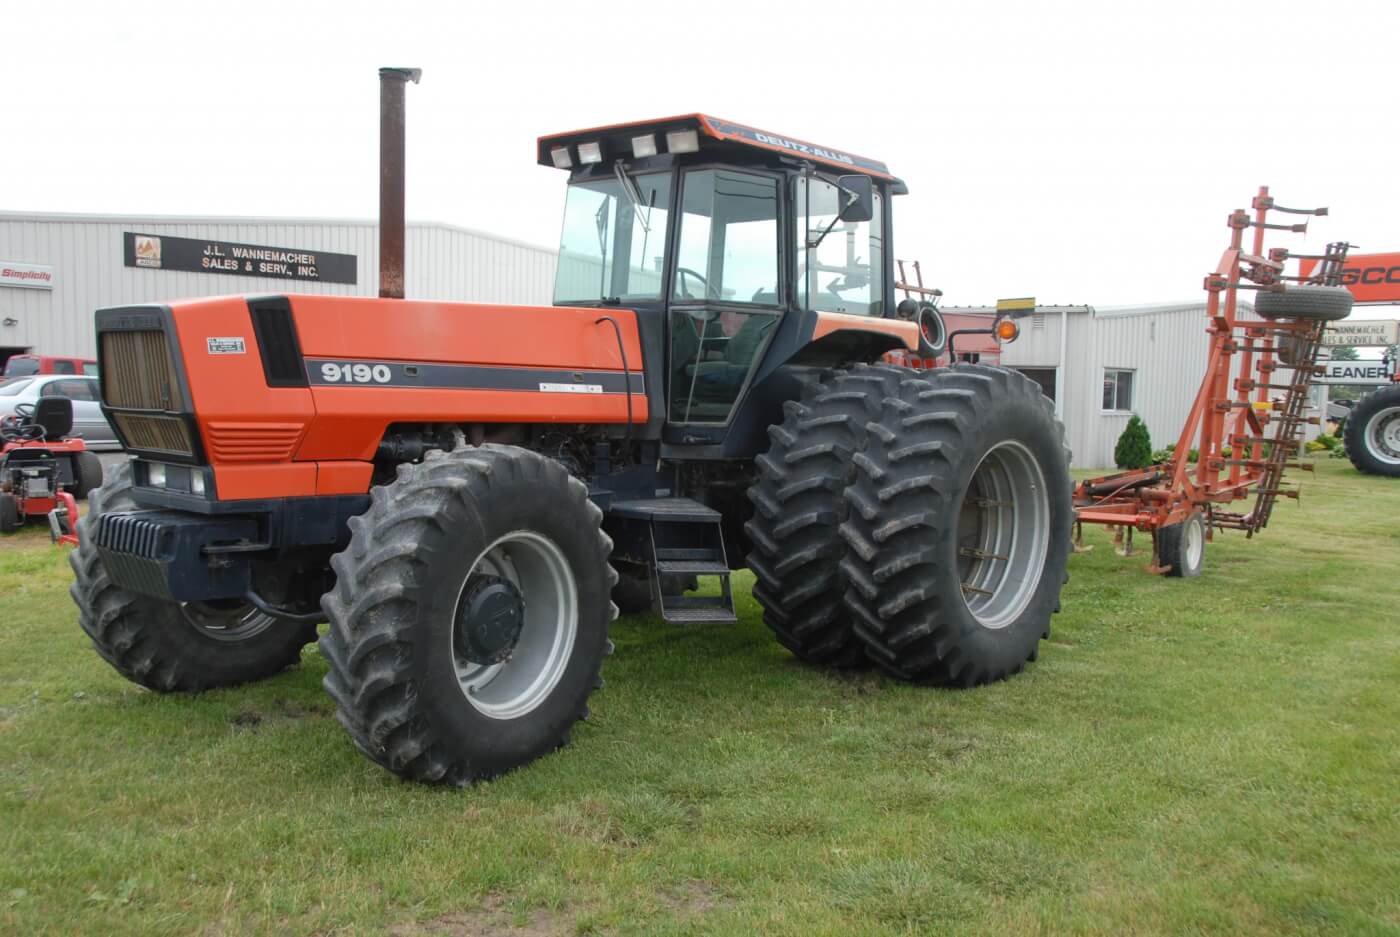 With a 119-inch wheelbase, the 9120 is a long tractor. That was a good thing from the weight balance and ride comfort standpoints, but made for a wide turning circle. This tractor weights more than nine tons before weight are added. It came standard with AWD and an 18-speed partial power shift transmission. This one has already lived a life of hard work but is not done yet. The rear dual radial tires make this a tractor that’s still up to long days in the field with big implements and tough ground. It’s seen here on AGCO Dealer J.L. Wannamacher’s lot in Ottoville, Ohio.